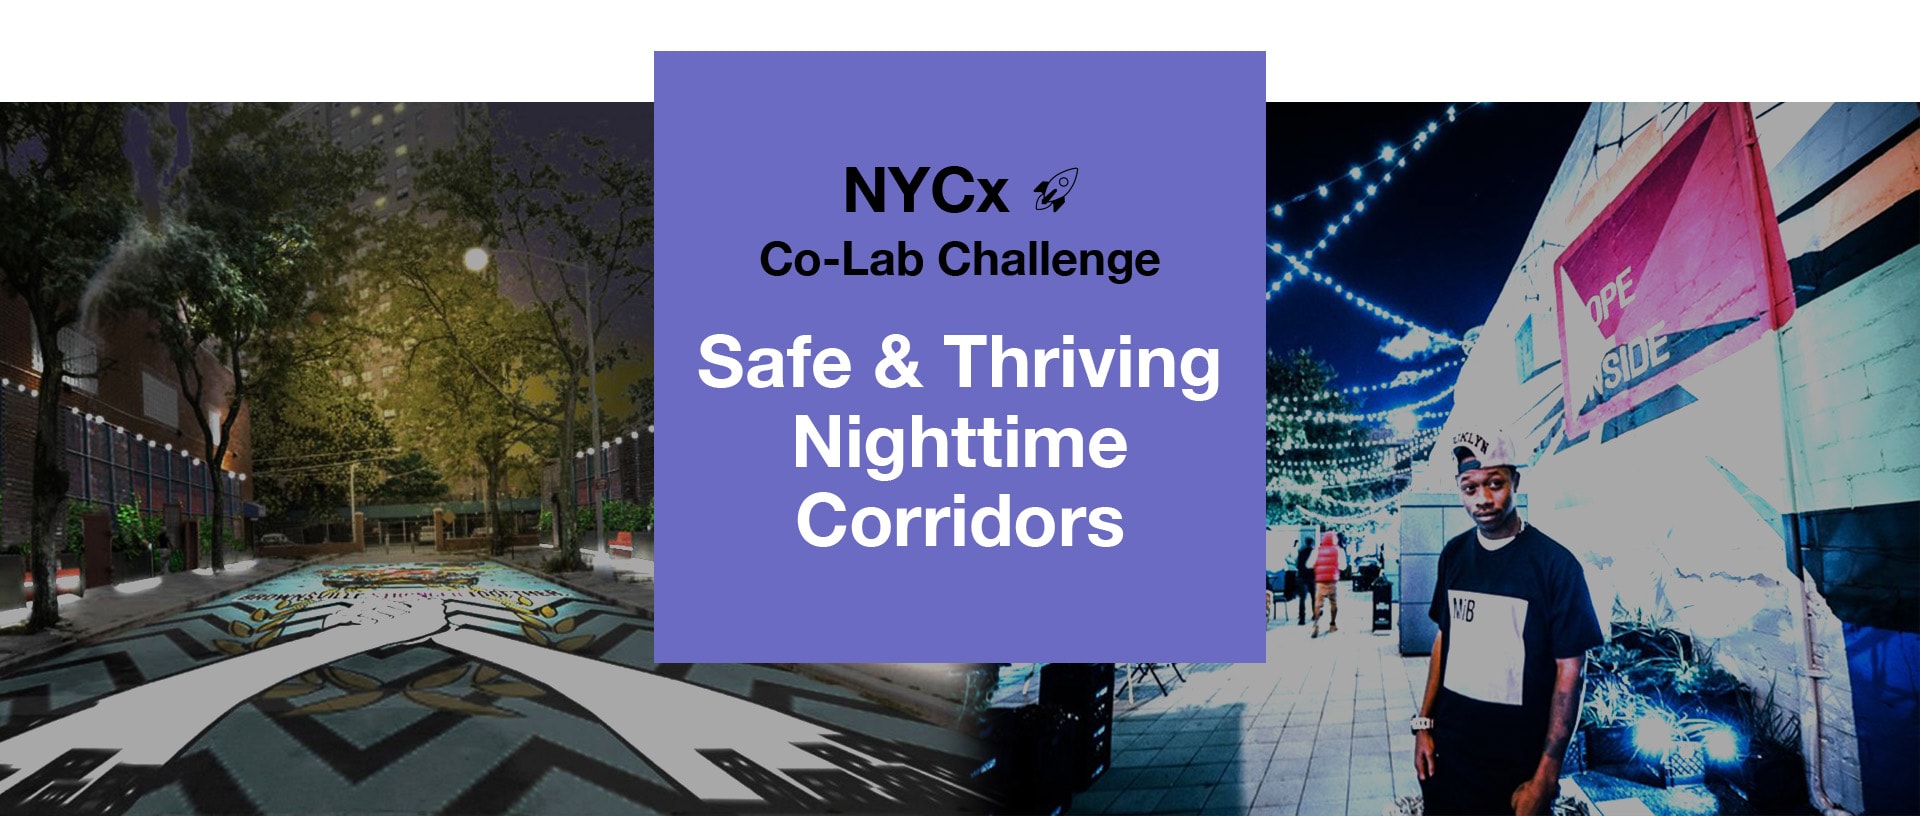 Header Image with text in a purple square that reads: NYCx Co-Lab Challenge: Safe & Thriving Nighttime Corridors